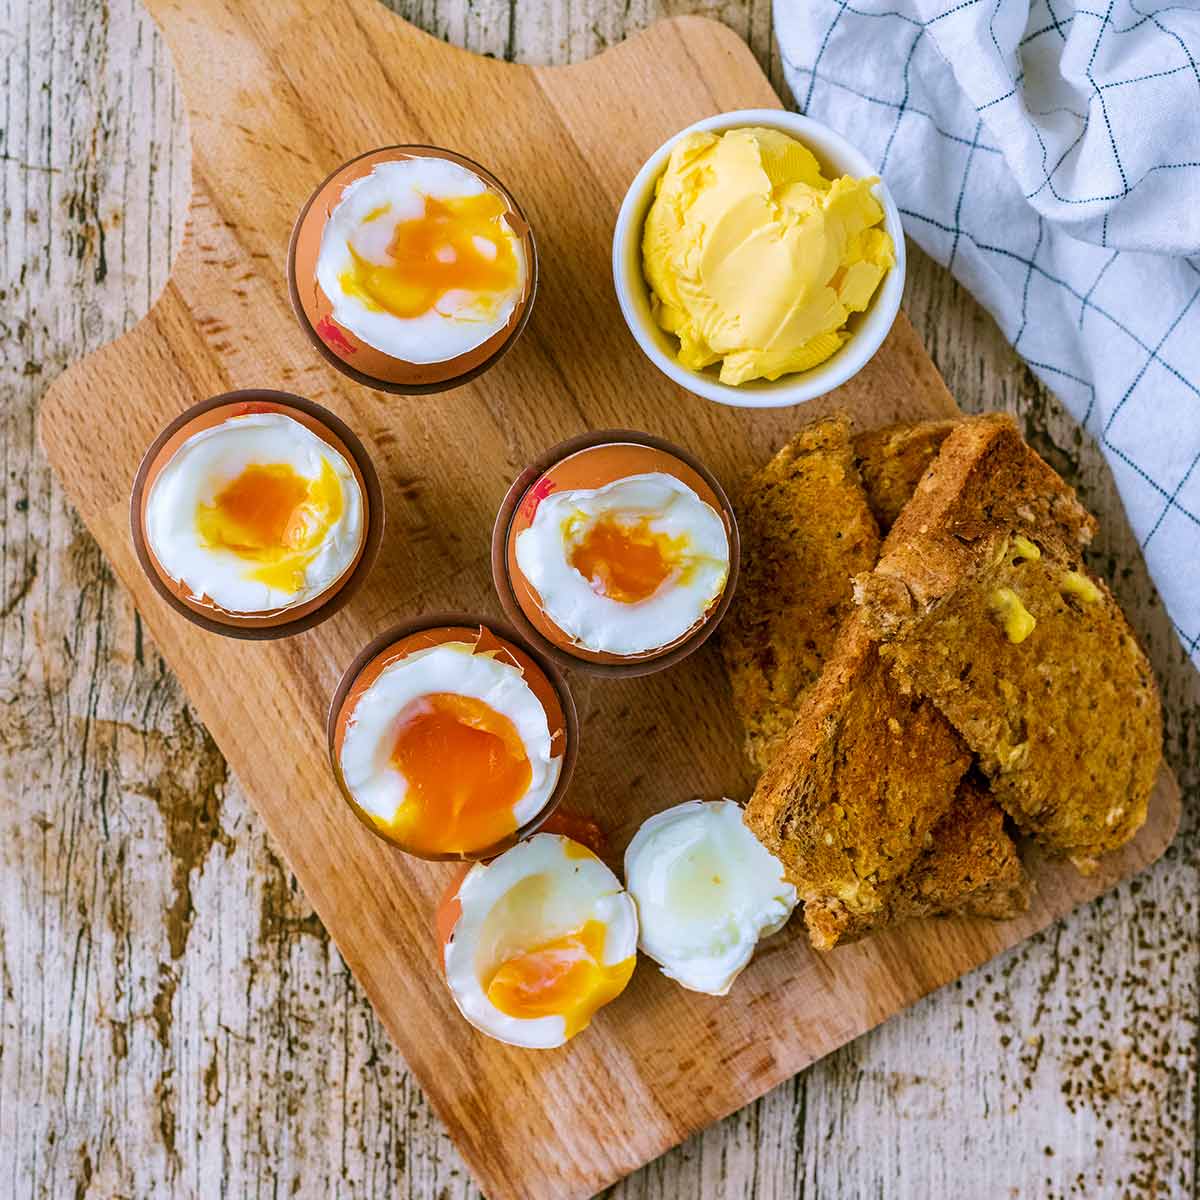 https://hungryhealthyhappy.com/wp-content/uploads/2022/11/air-fryer-boiled-eggs-featured.jpg